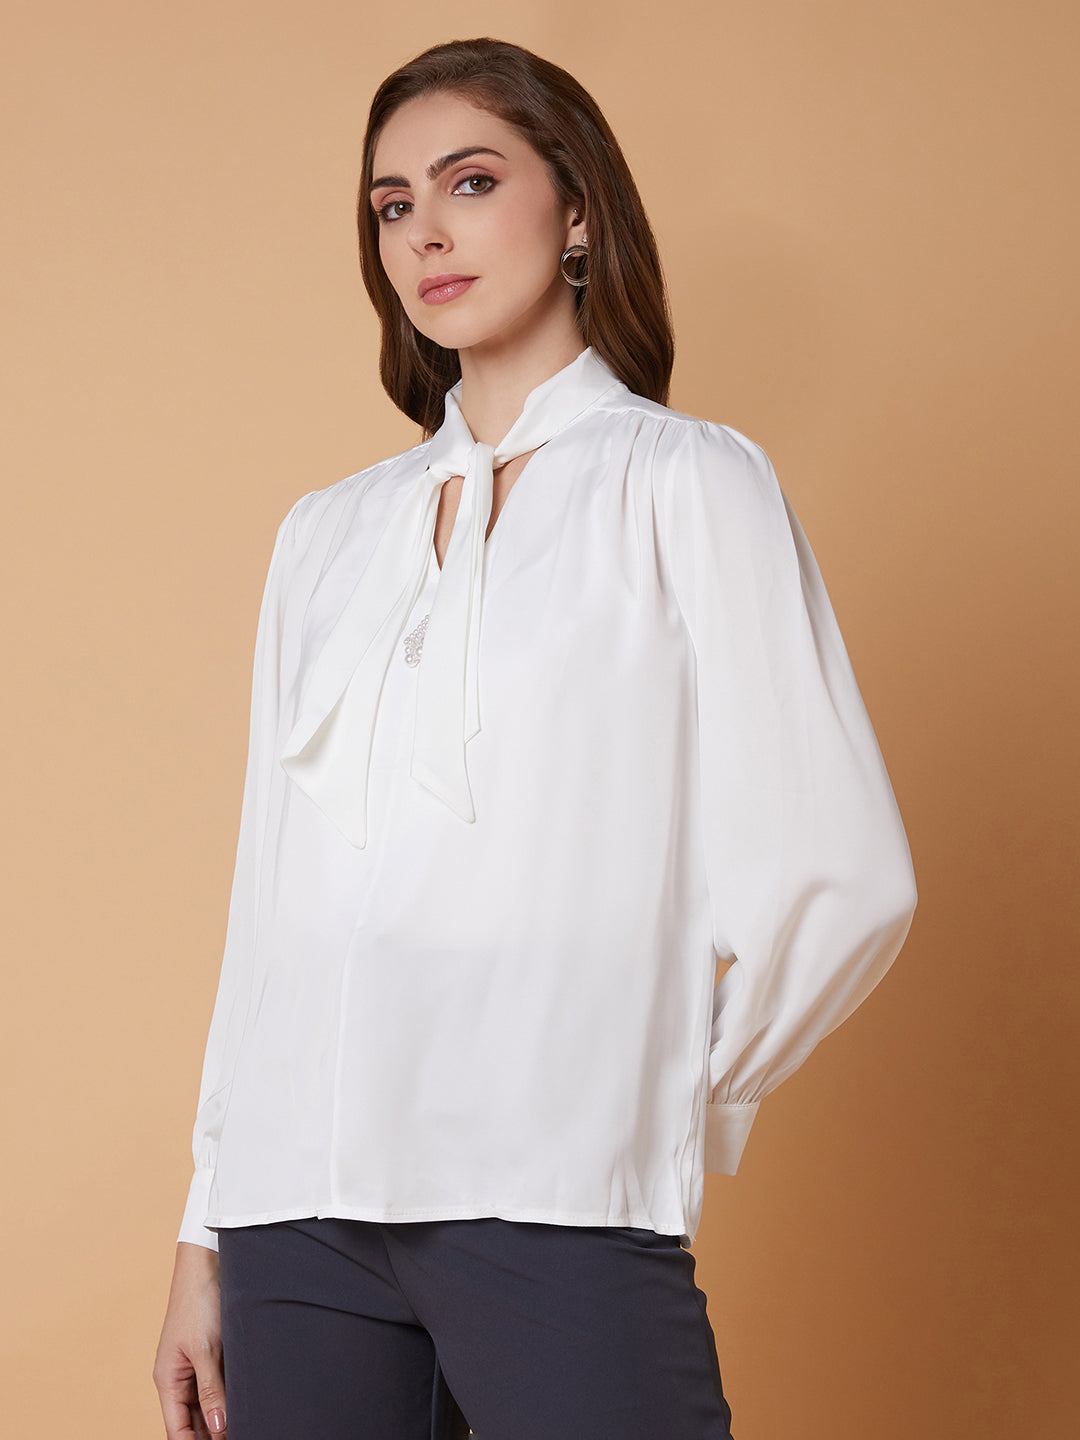 Women Solid White Shirt Style Top